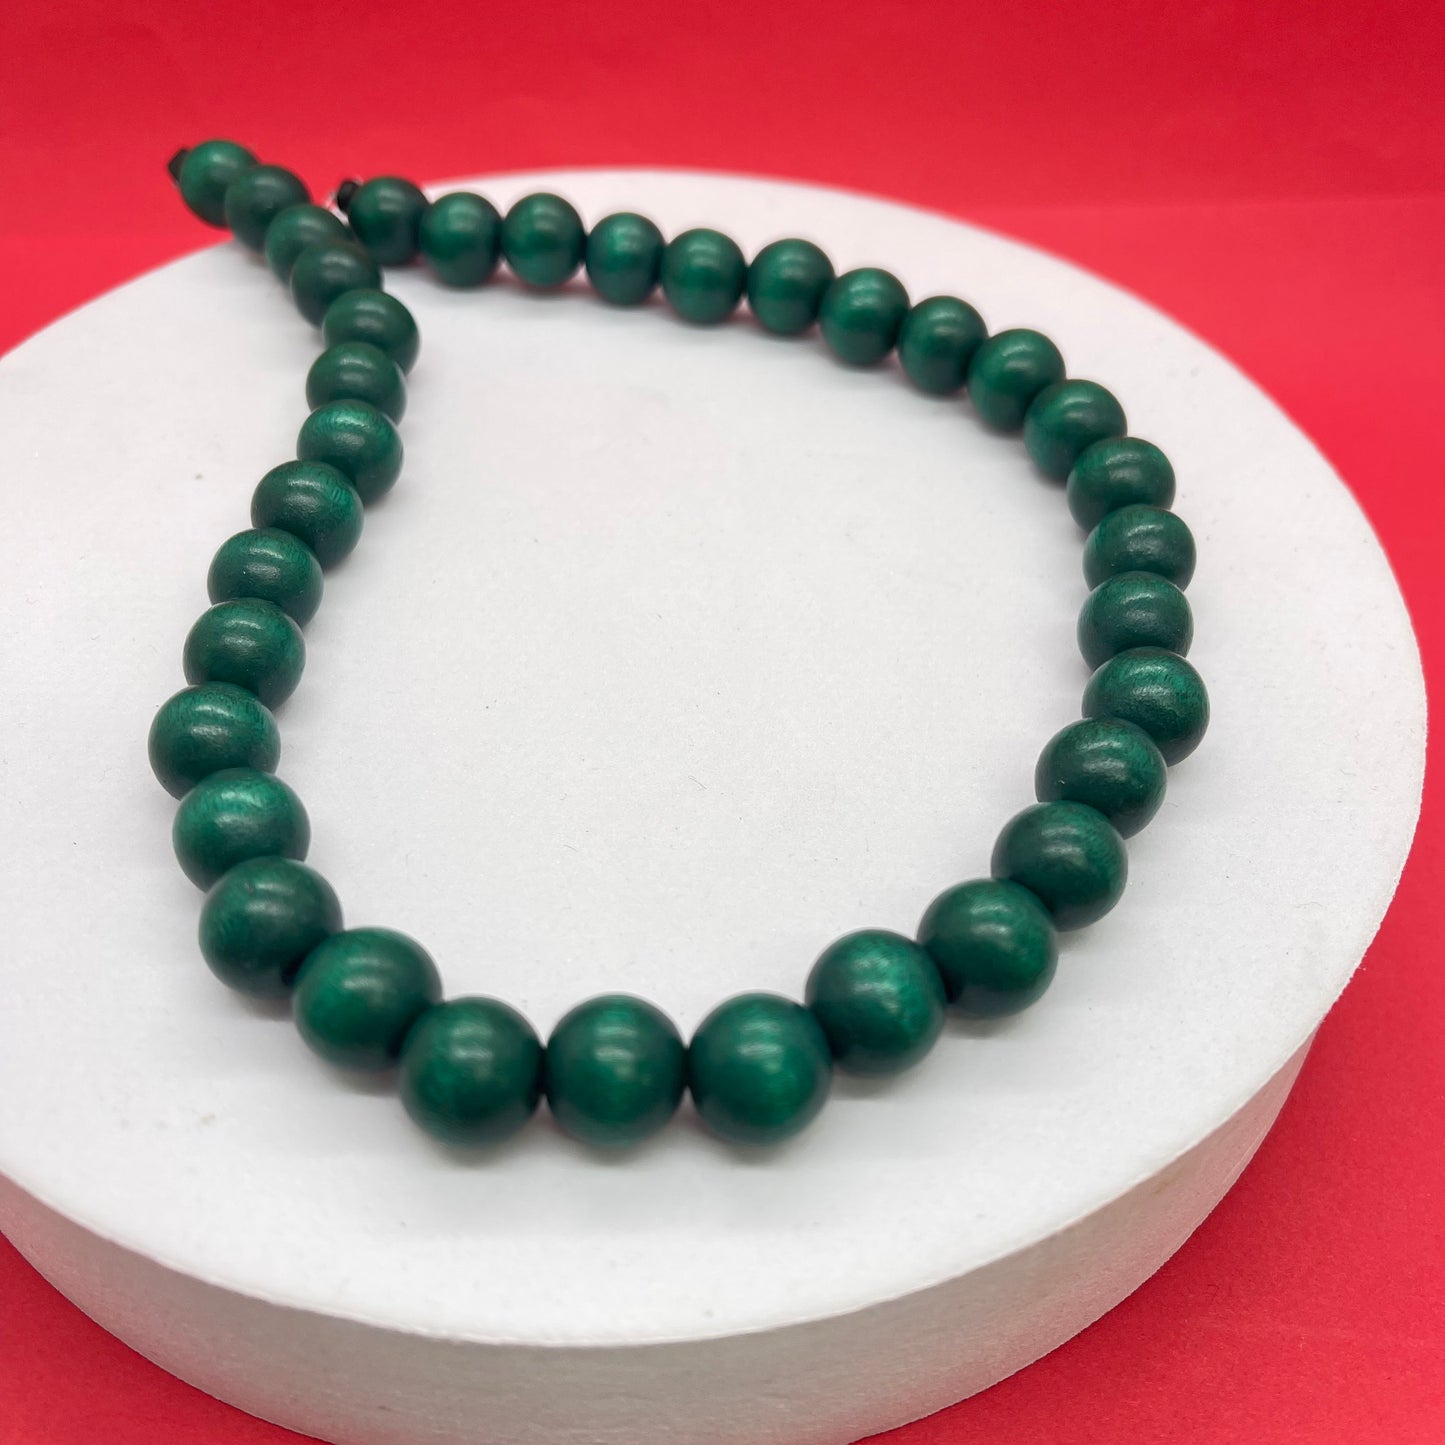 Beads Madera Verde Oscuro 12mm